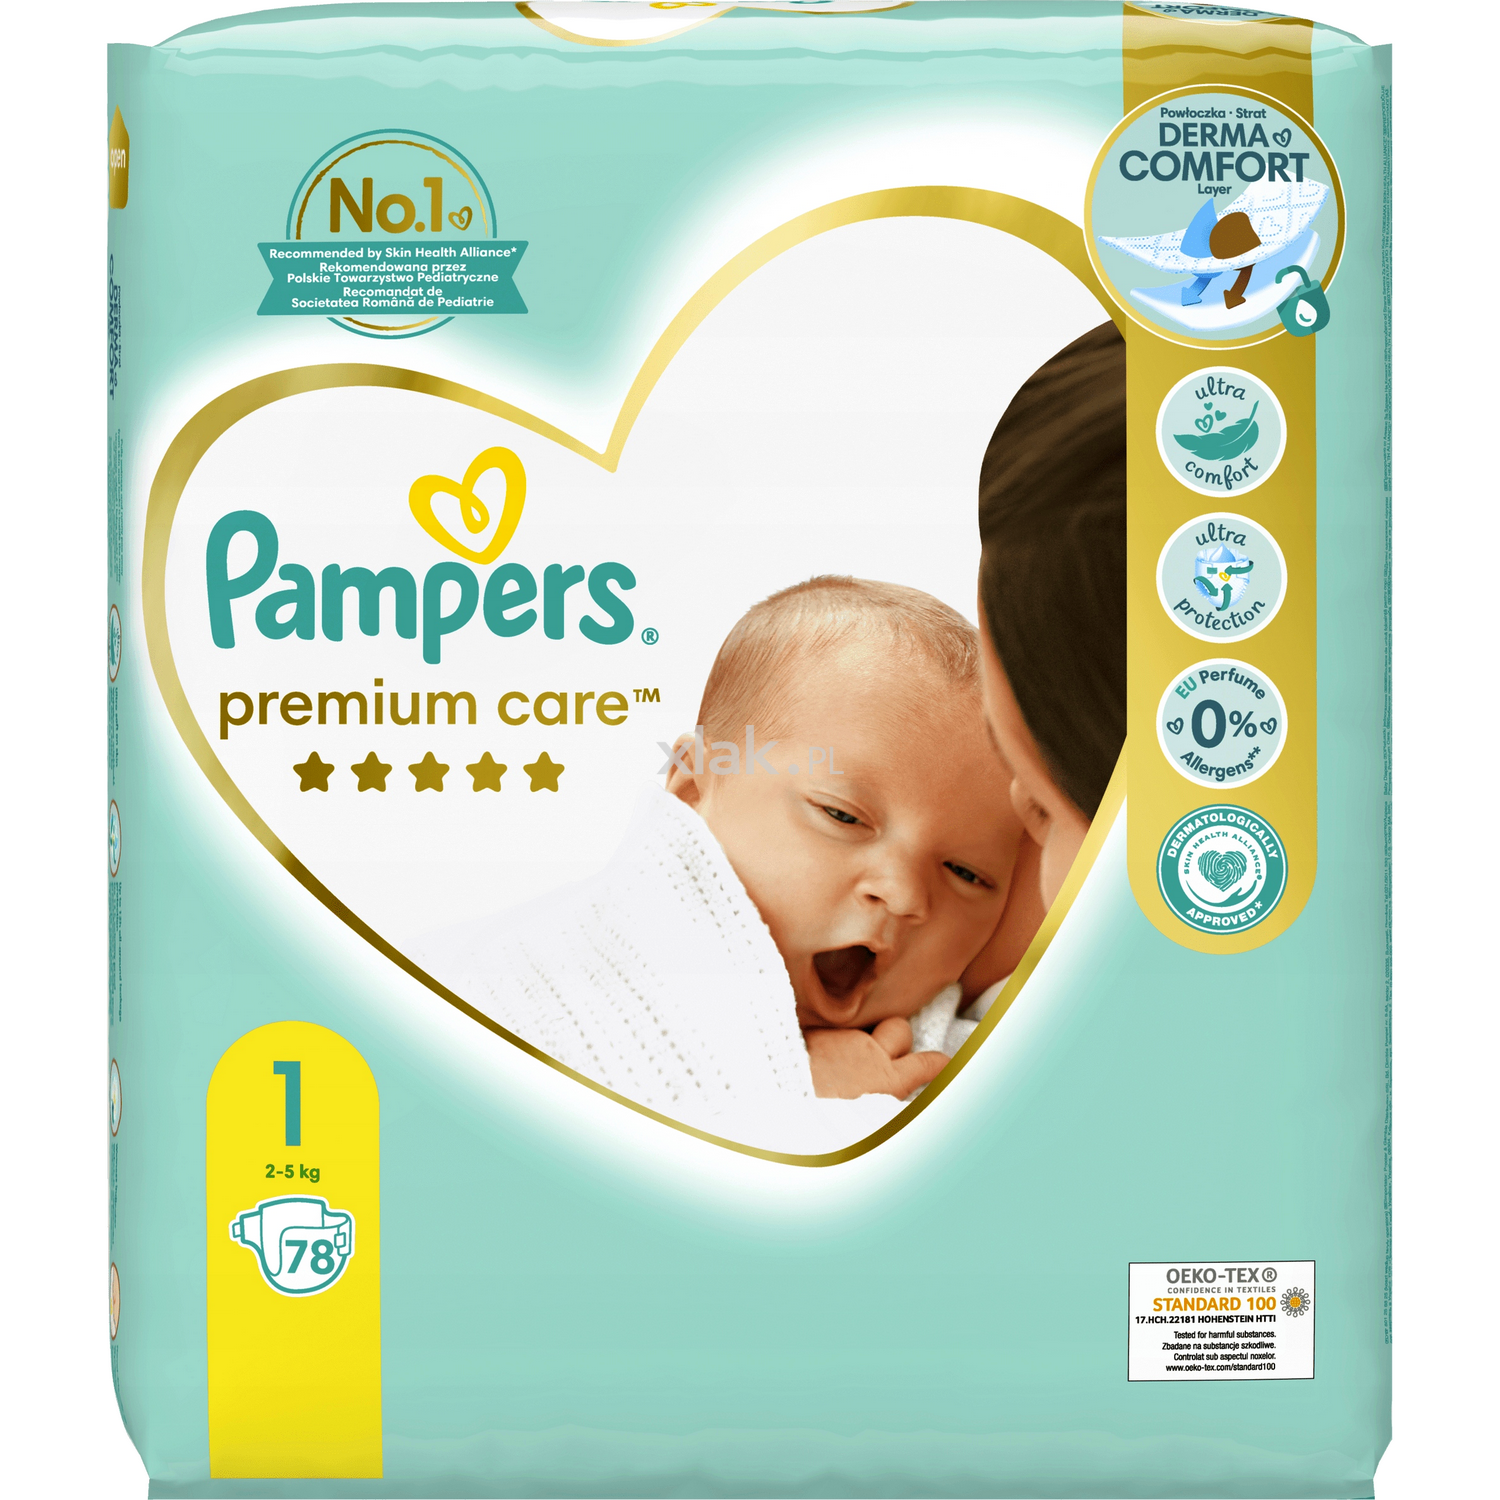 pieluchy pampers new baby baby care